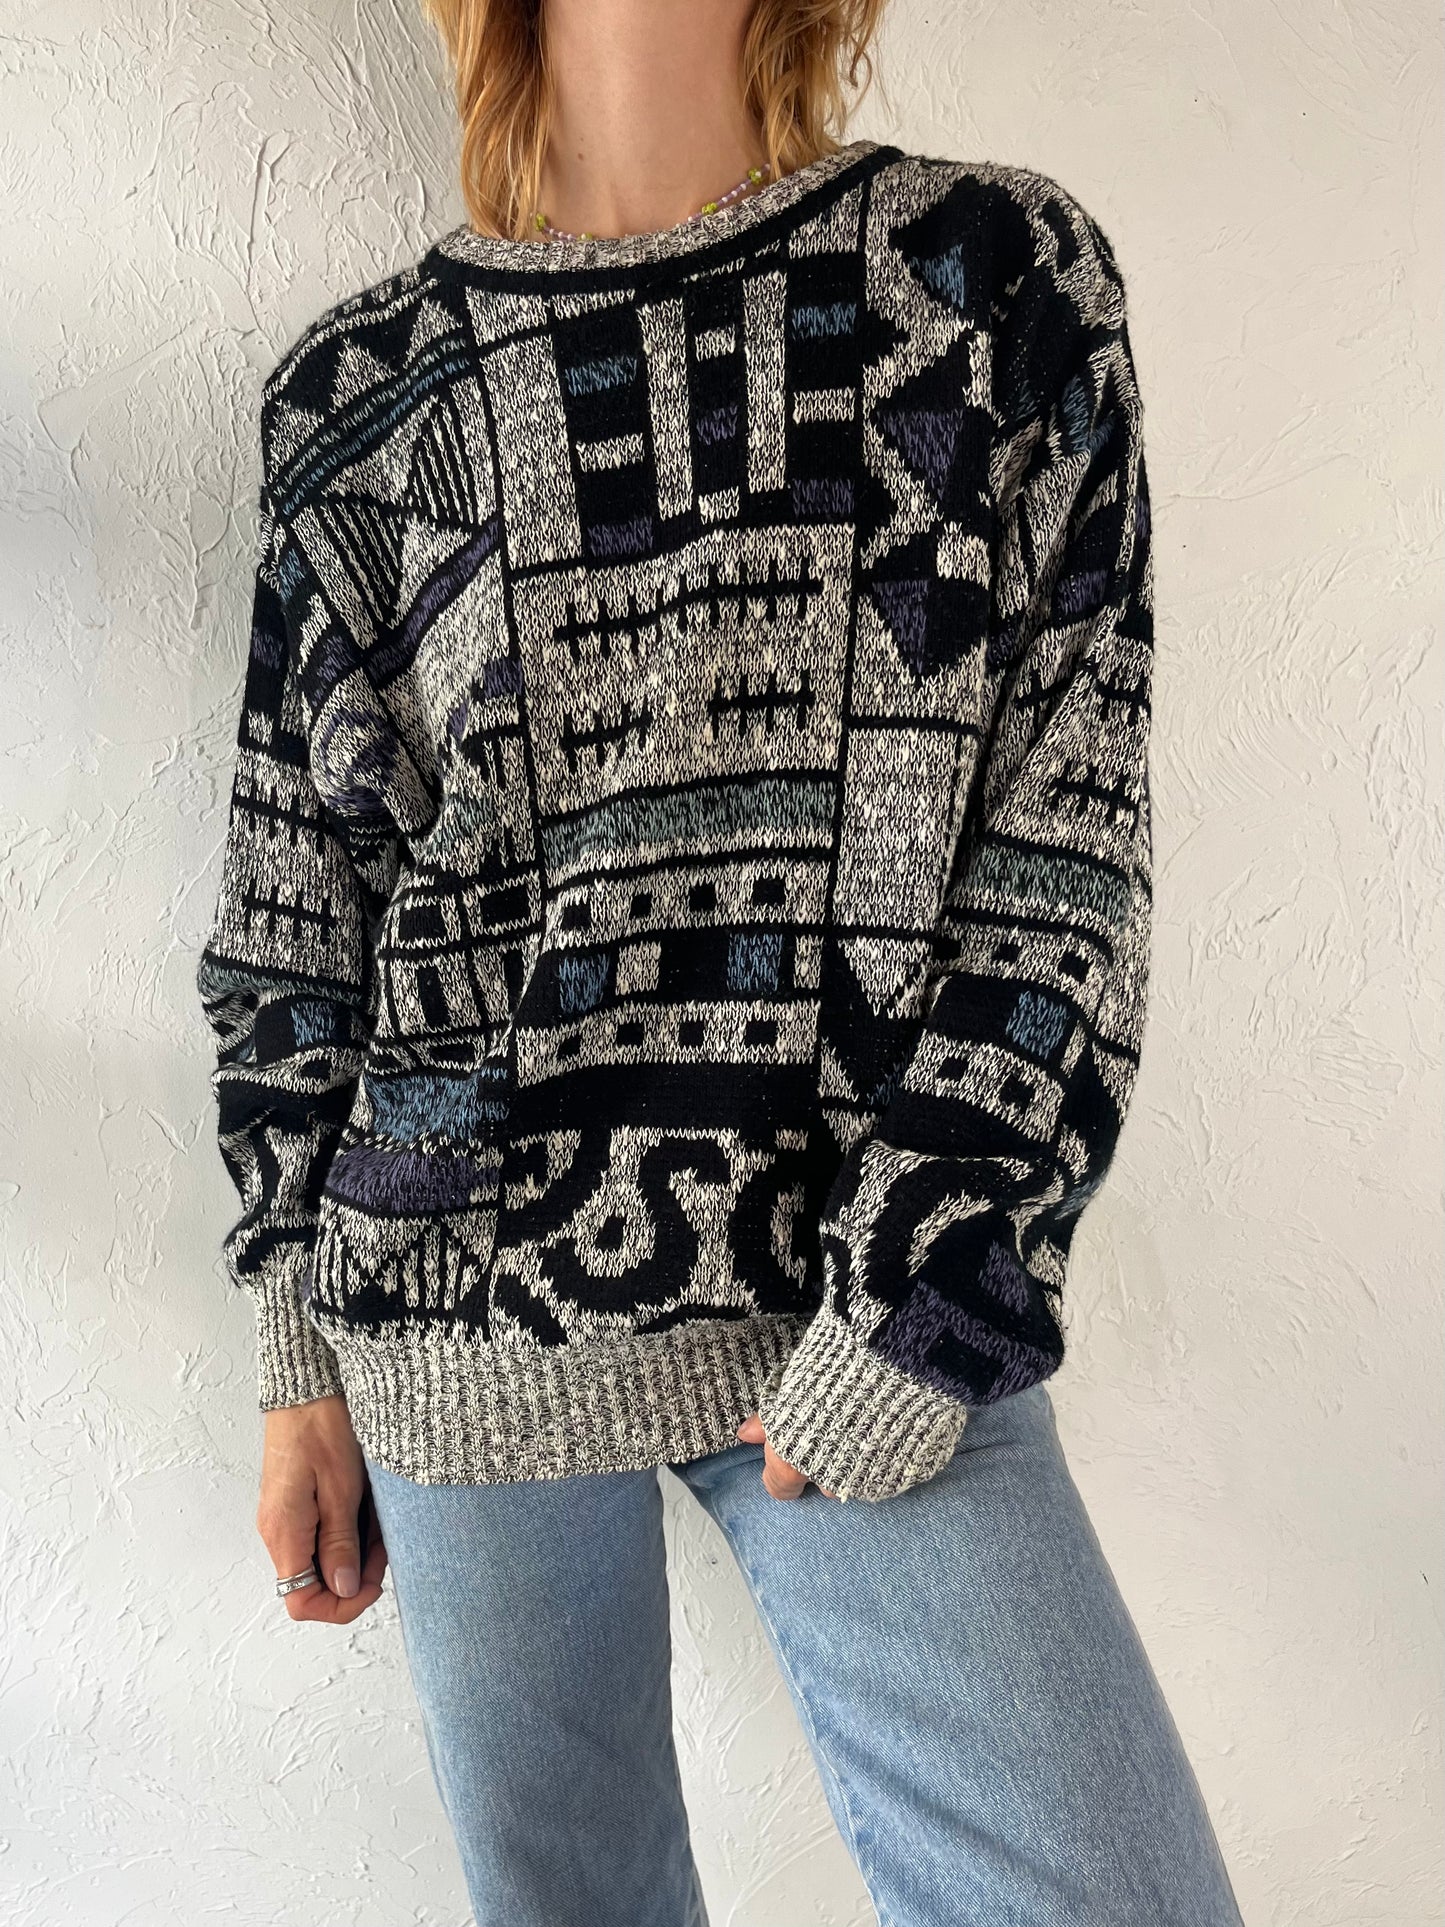 90s 'Expressions International' Abstract Knit Sweater / Medium